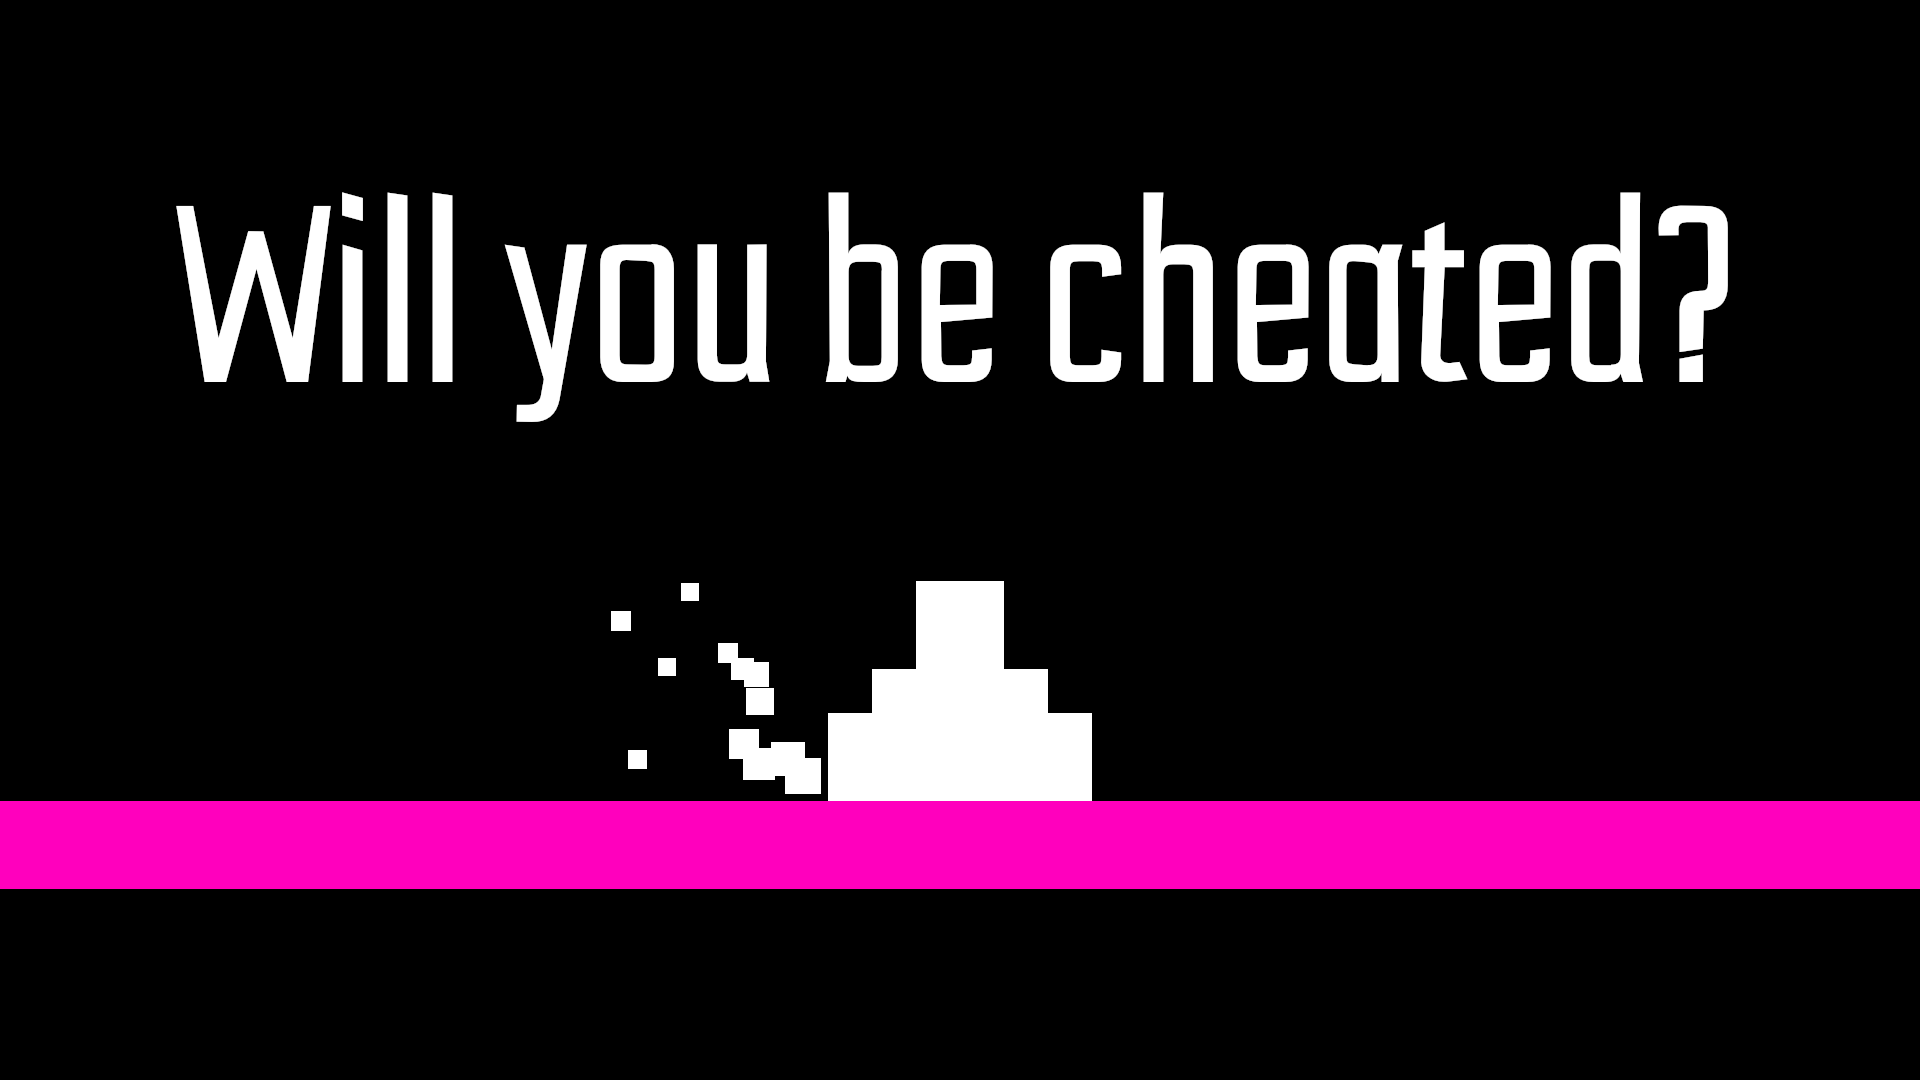 Will you be cheated?